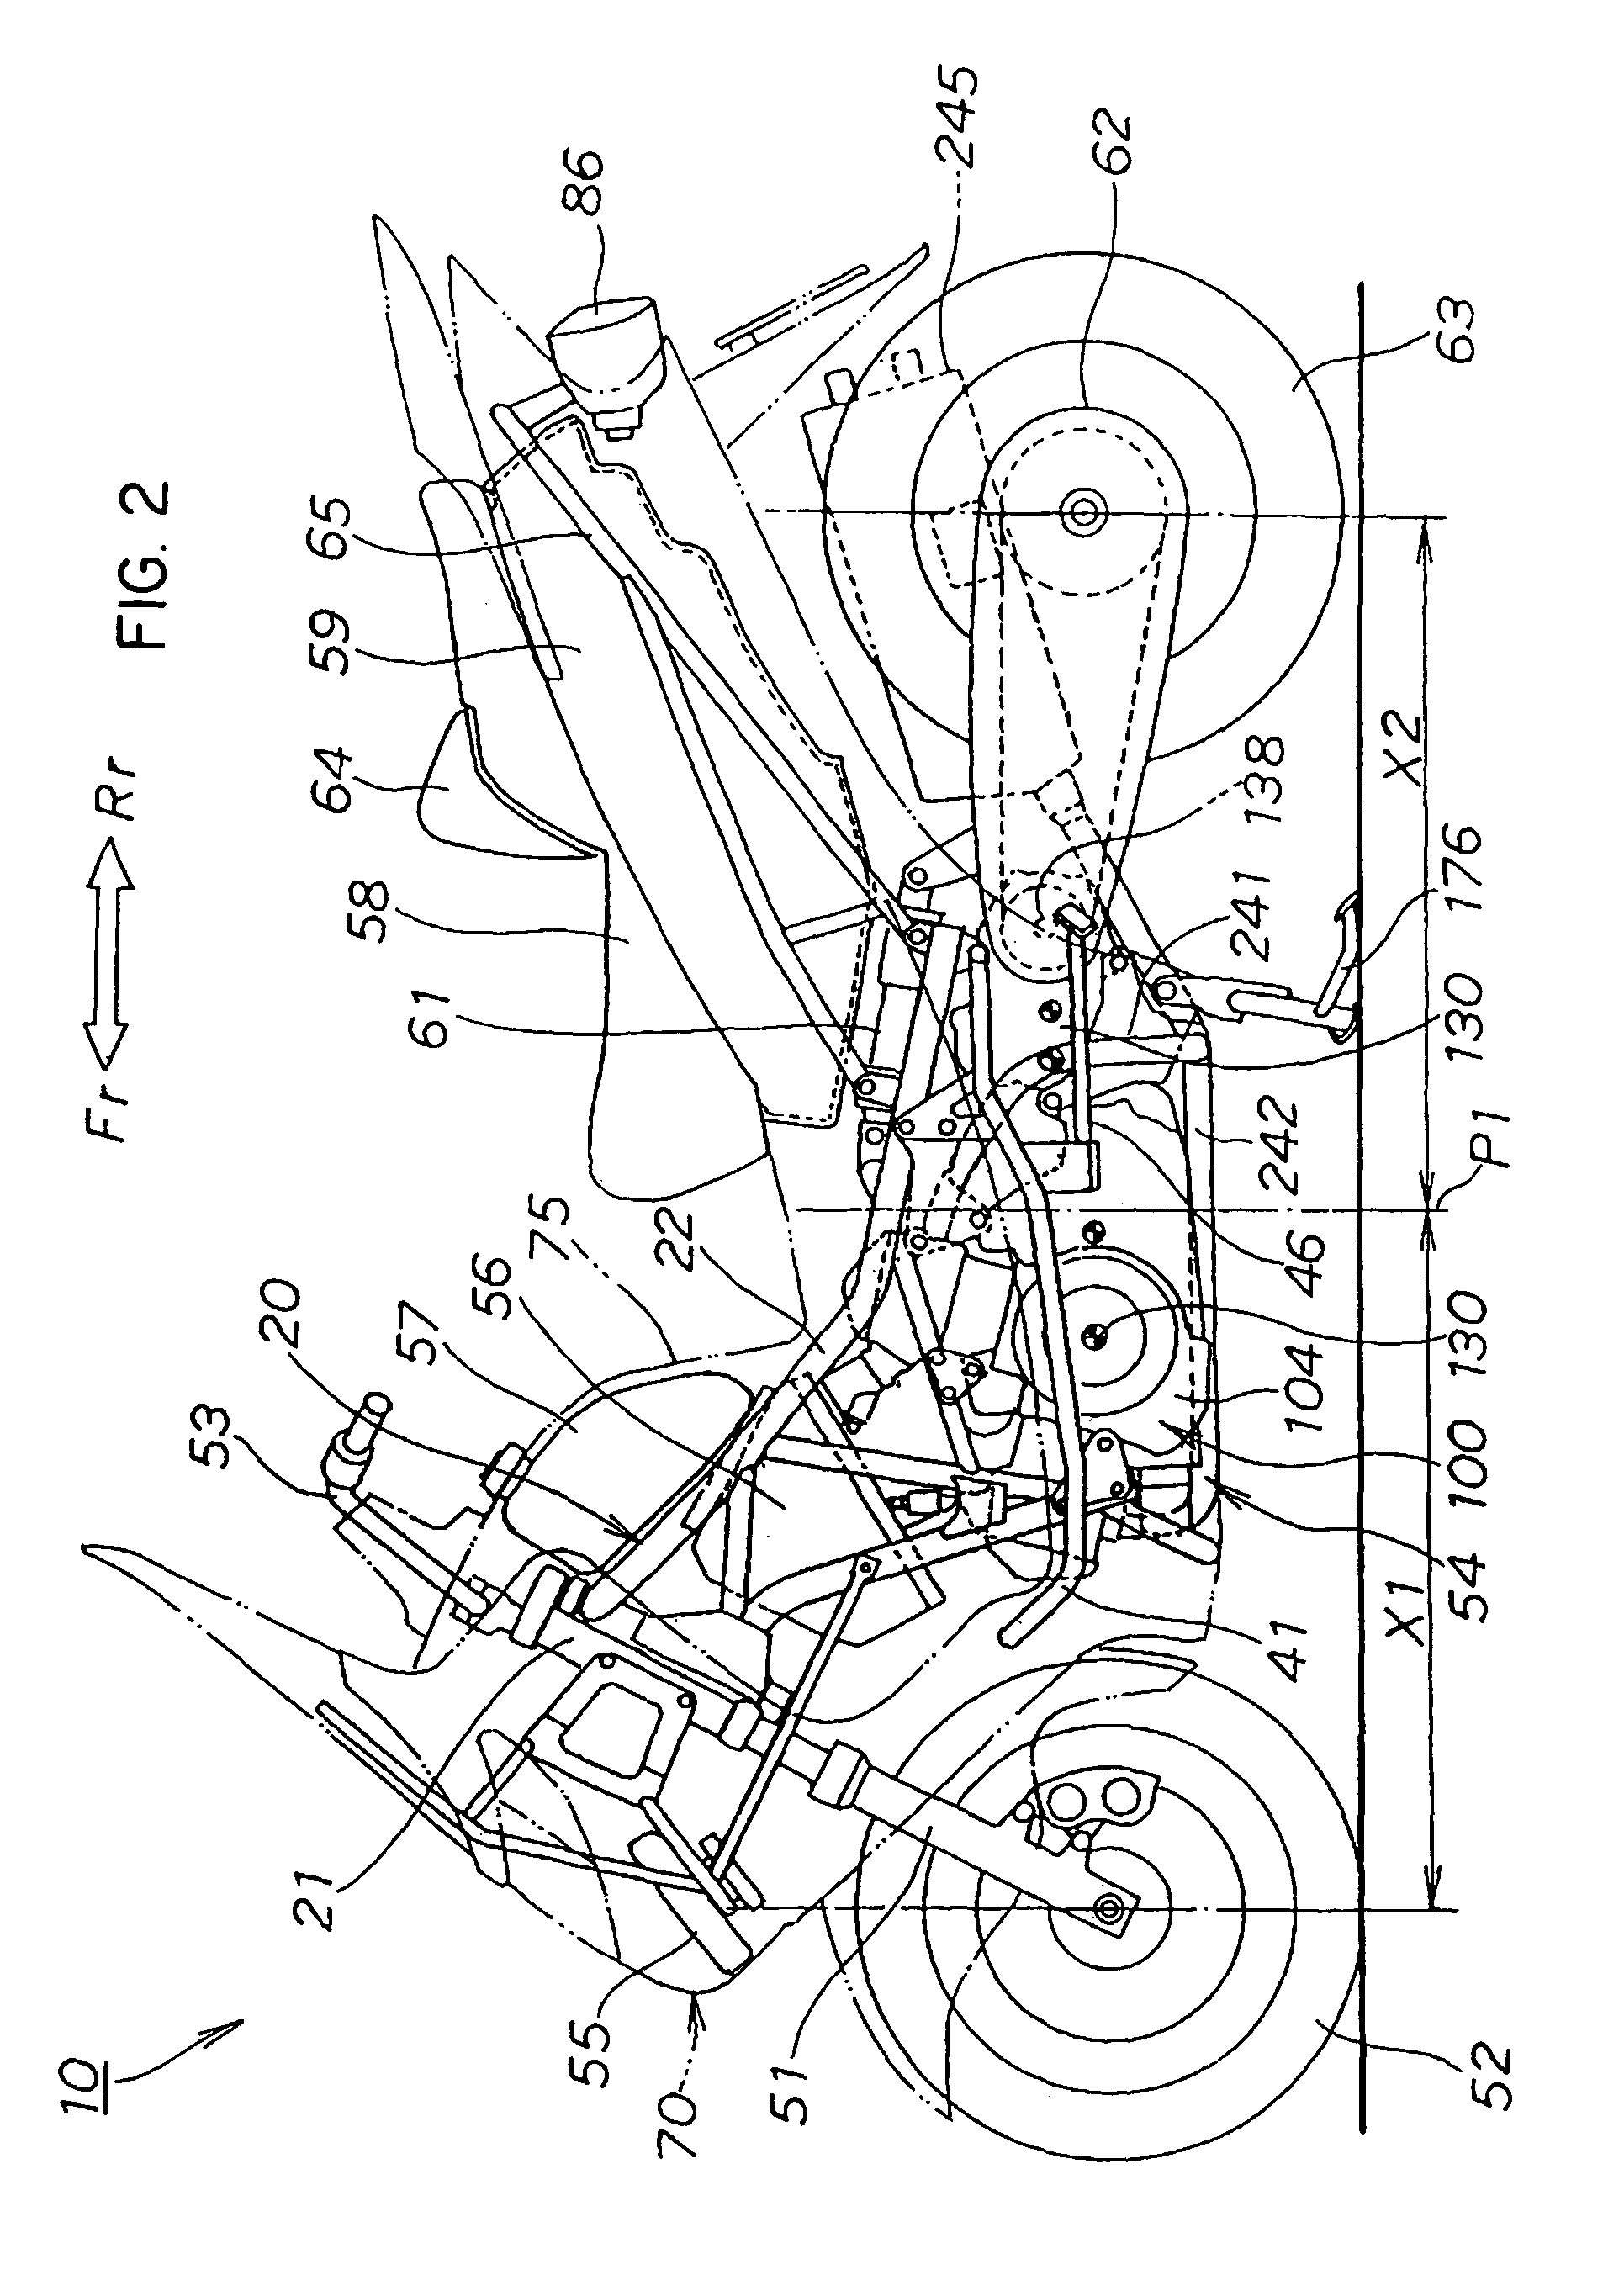 Engine mounting structure of low floor type vehicle